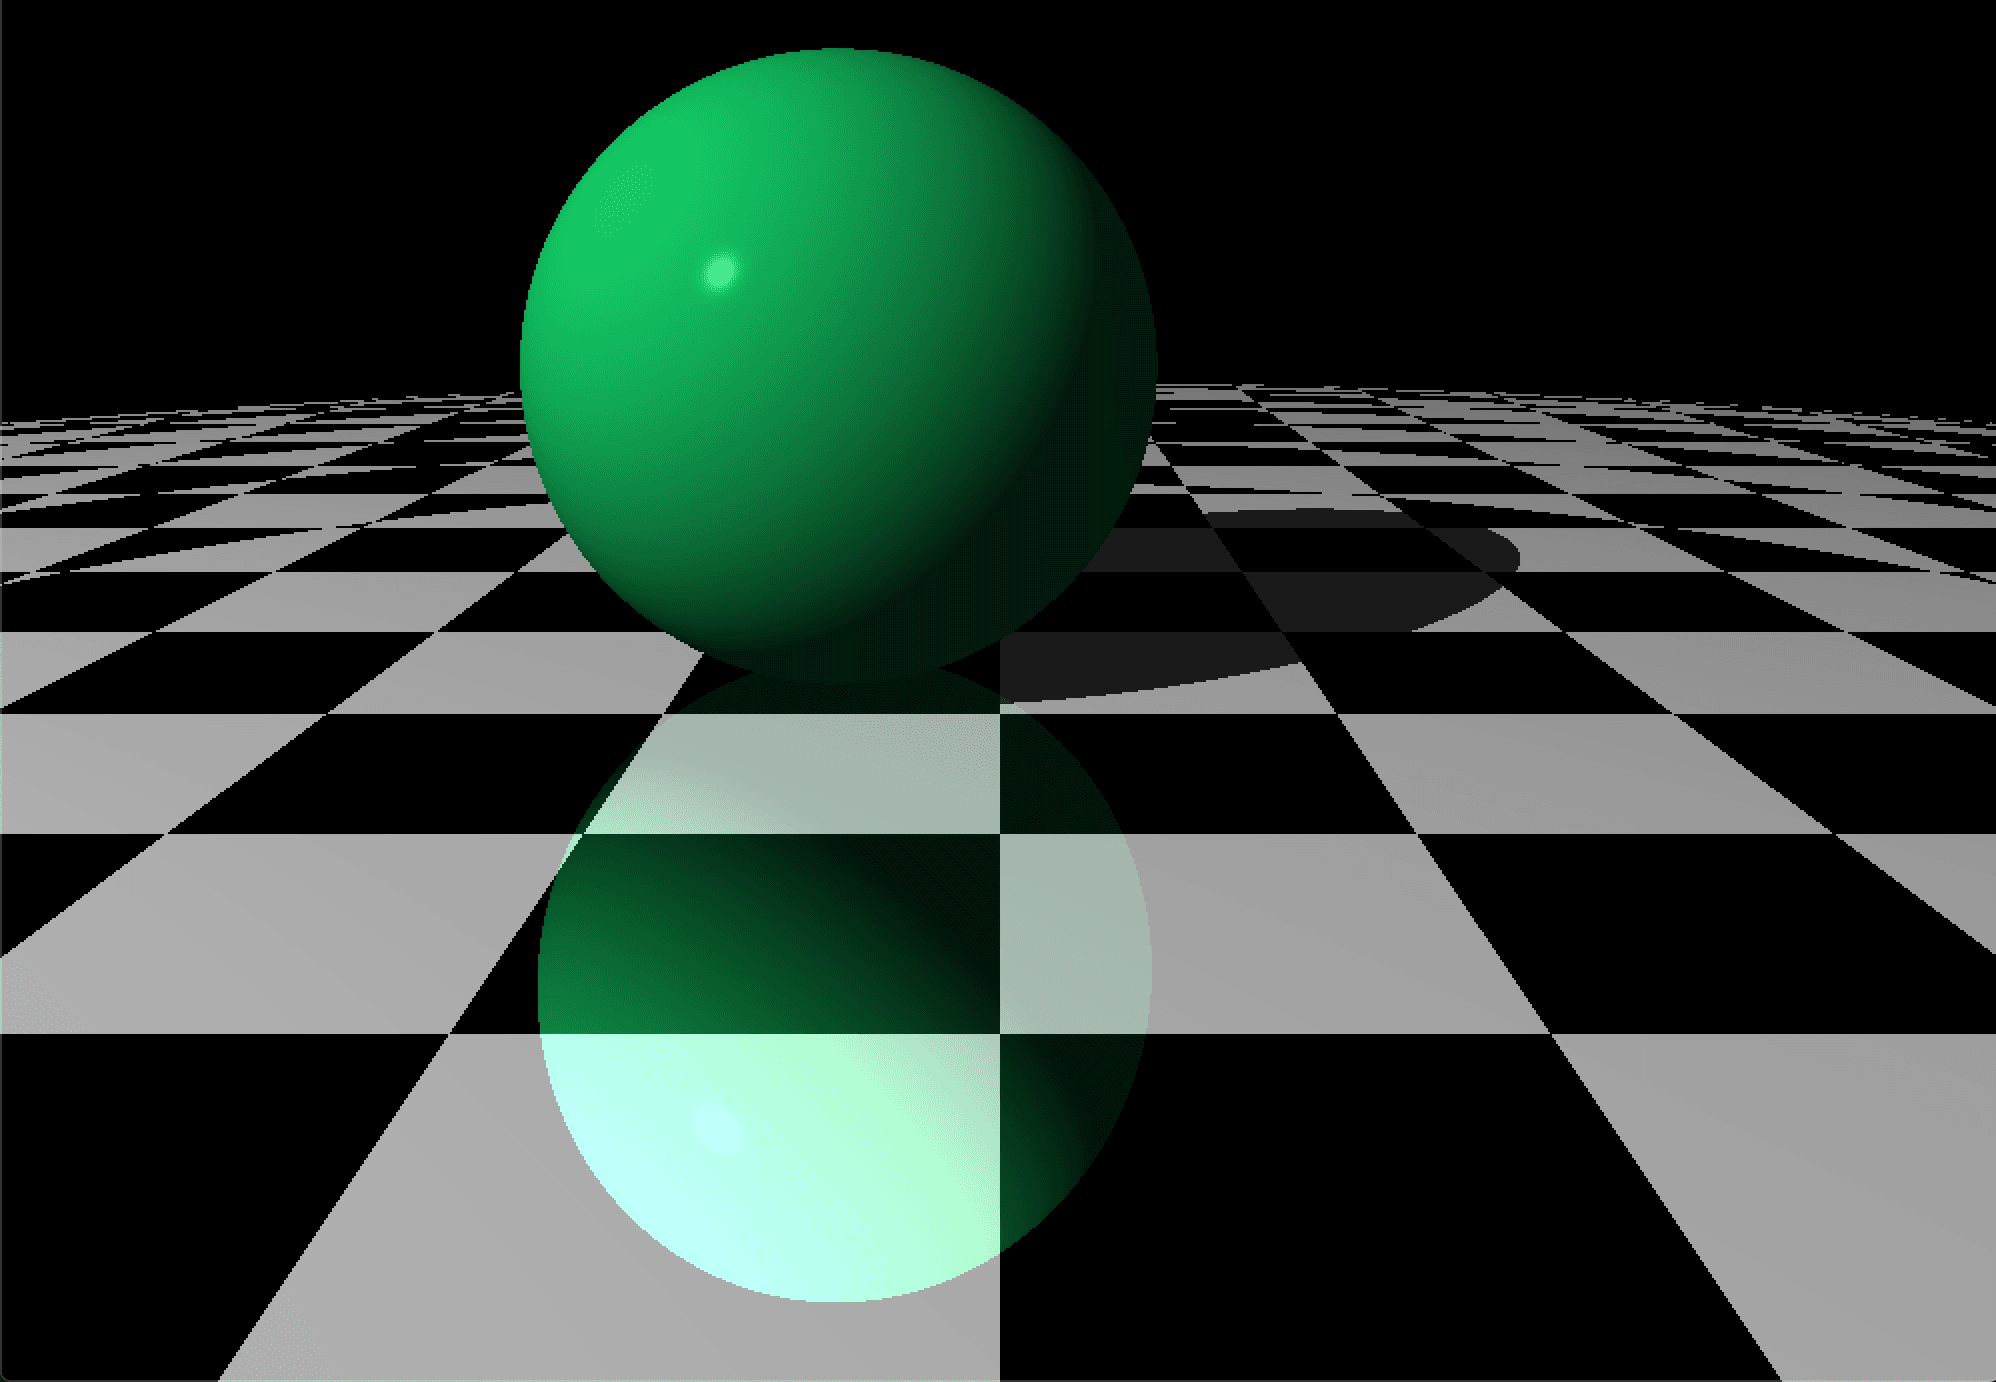 A green ball sitting on a reflective black and white checkered floor.